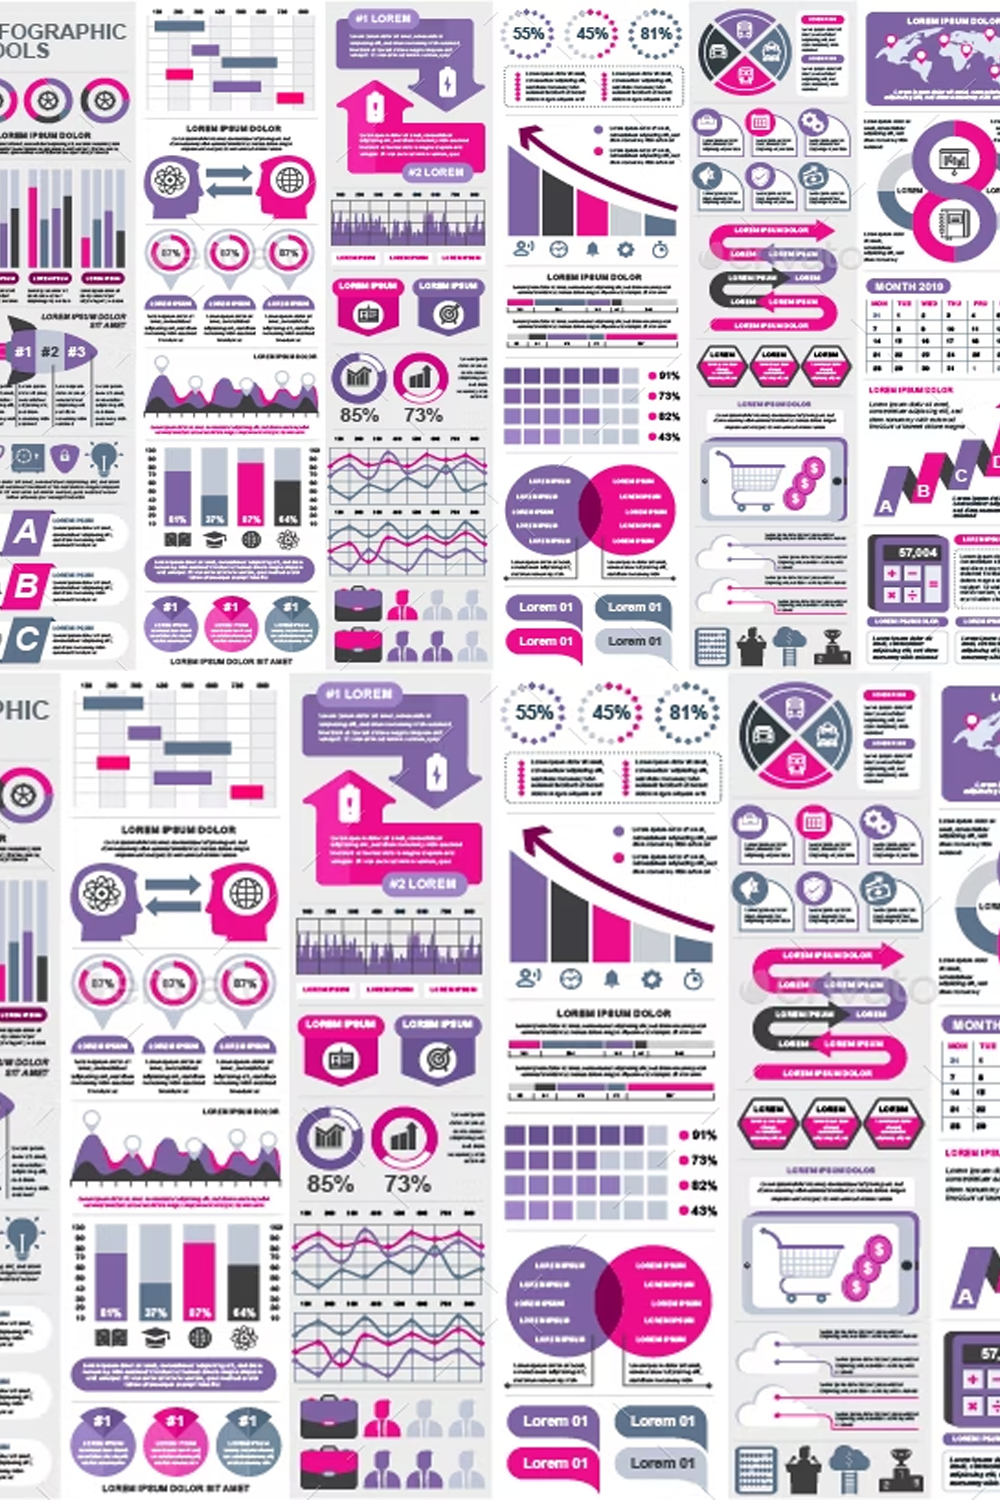 Illustrations business infographic elements of pinterest.